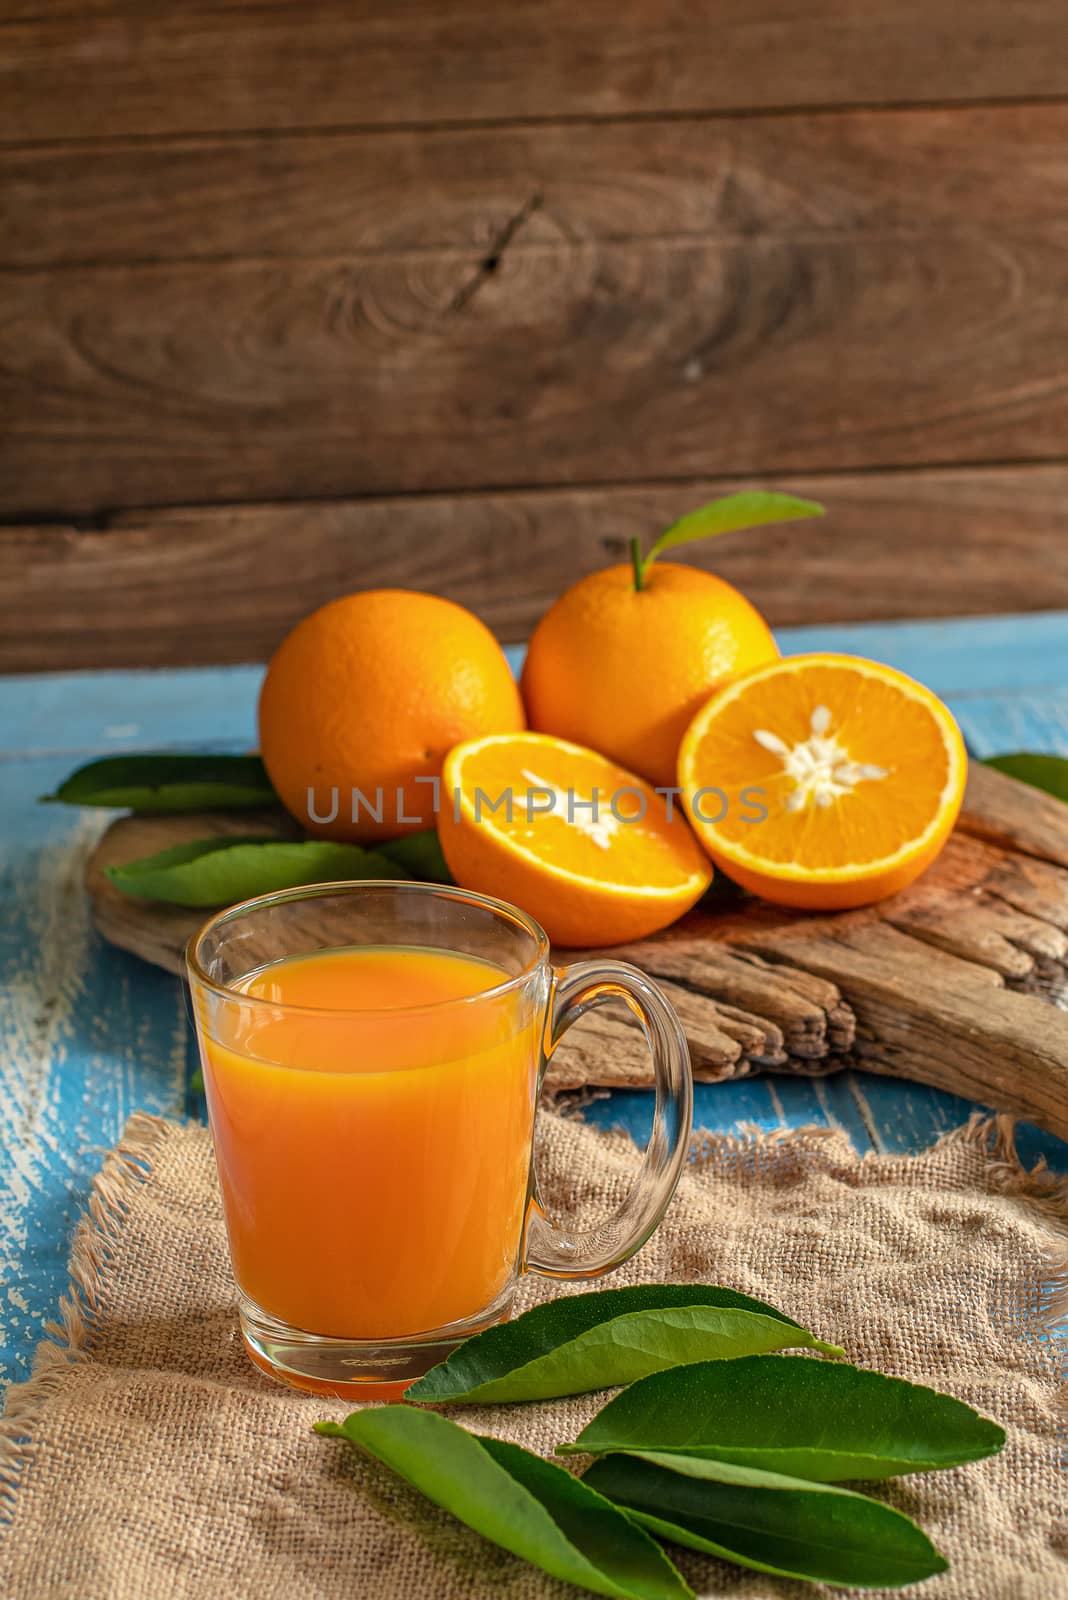 Fresh orange and a glass of orange juice on a wooden table background.